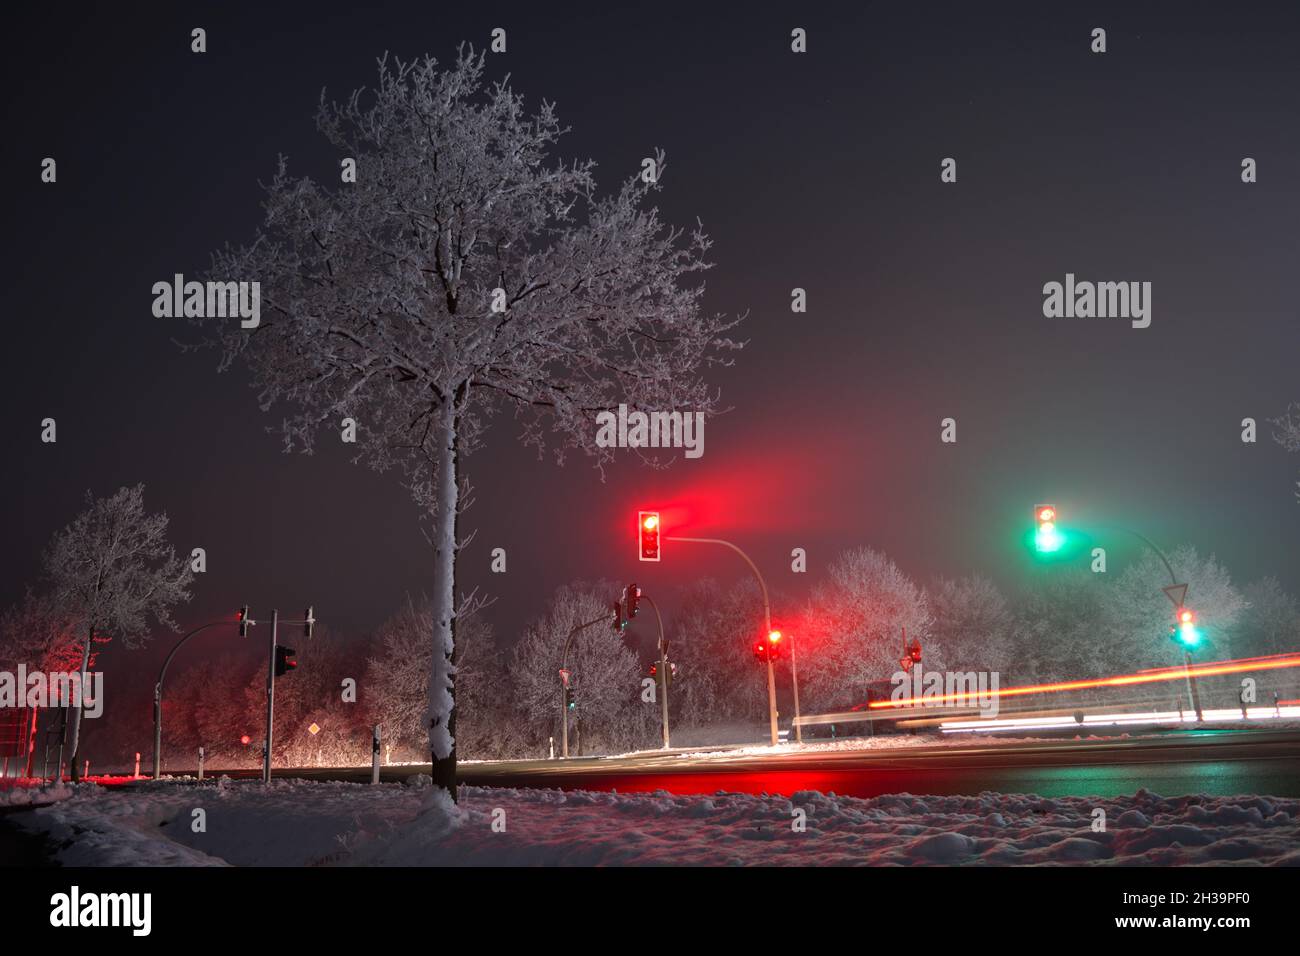 Intersection in Winter. Stock Photo